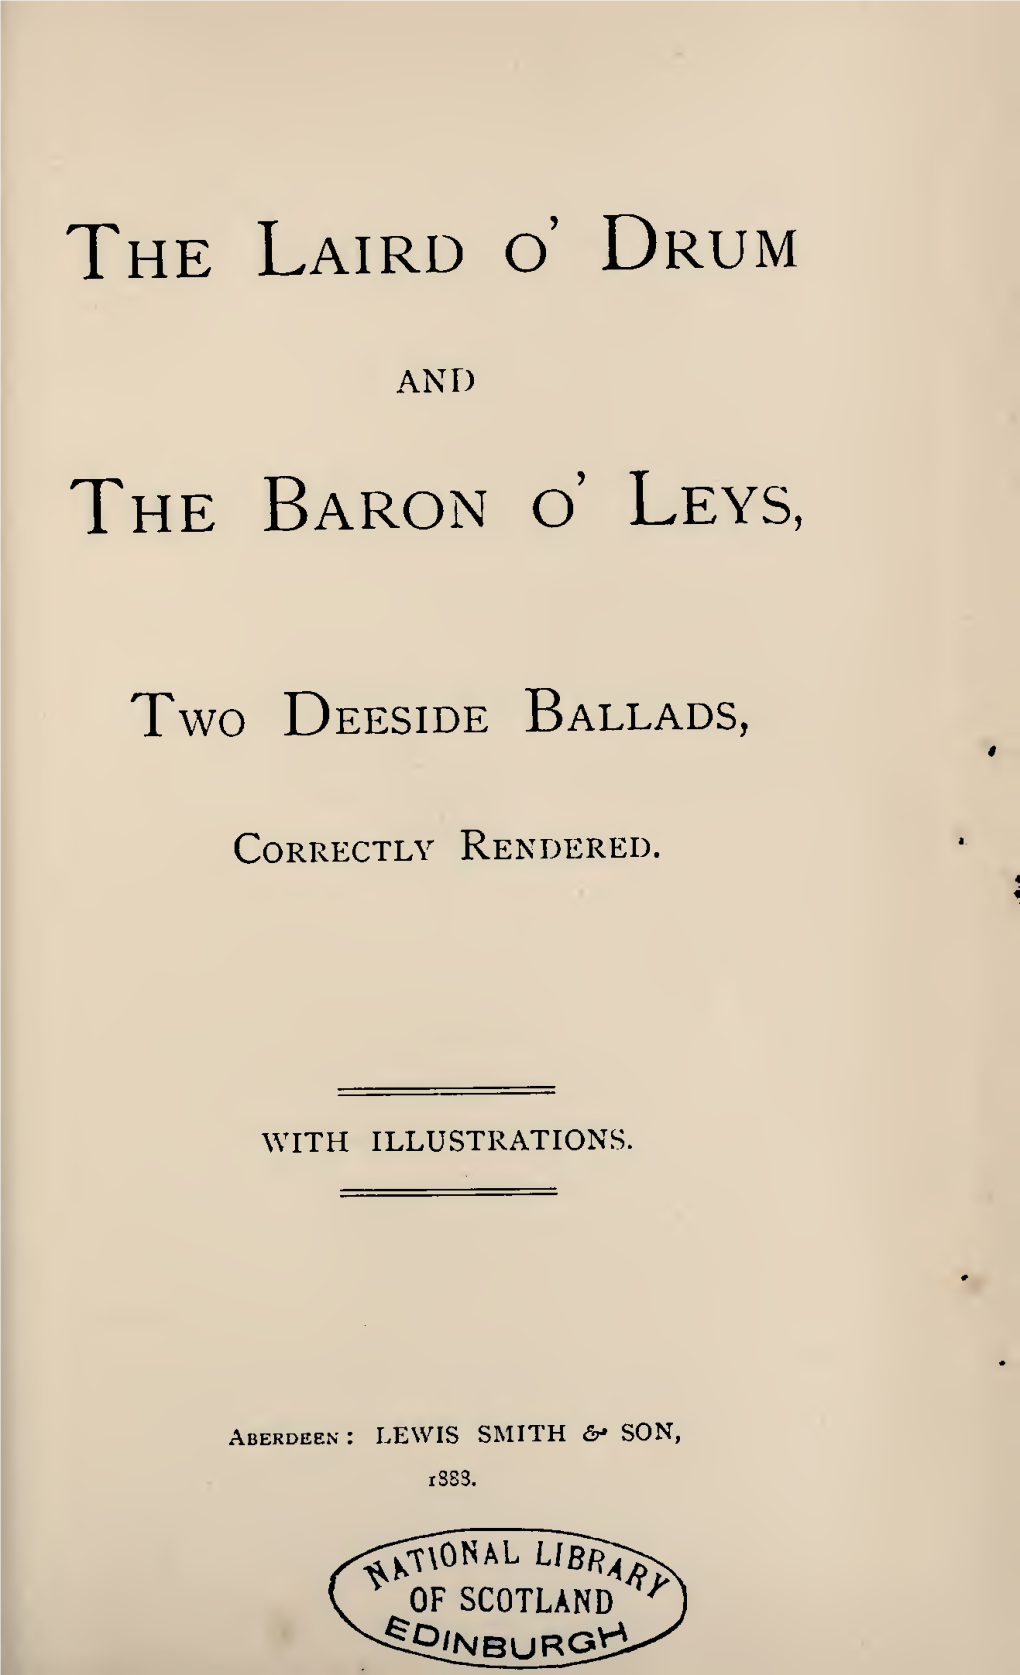 The Laird O' Drum and the Baron O' Leys, Two Deeside Ballads